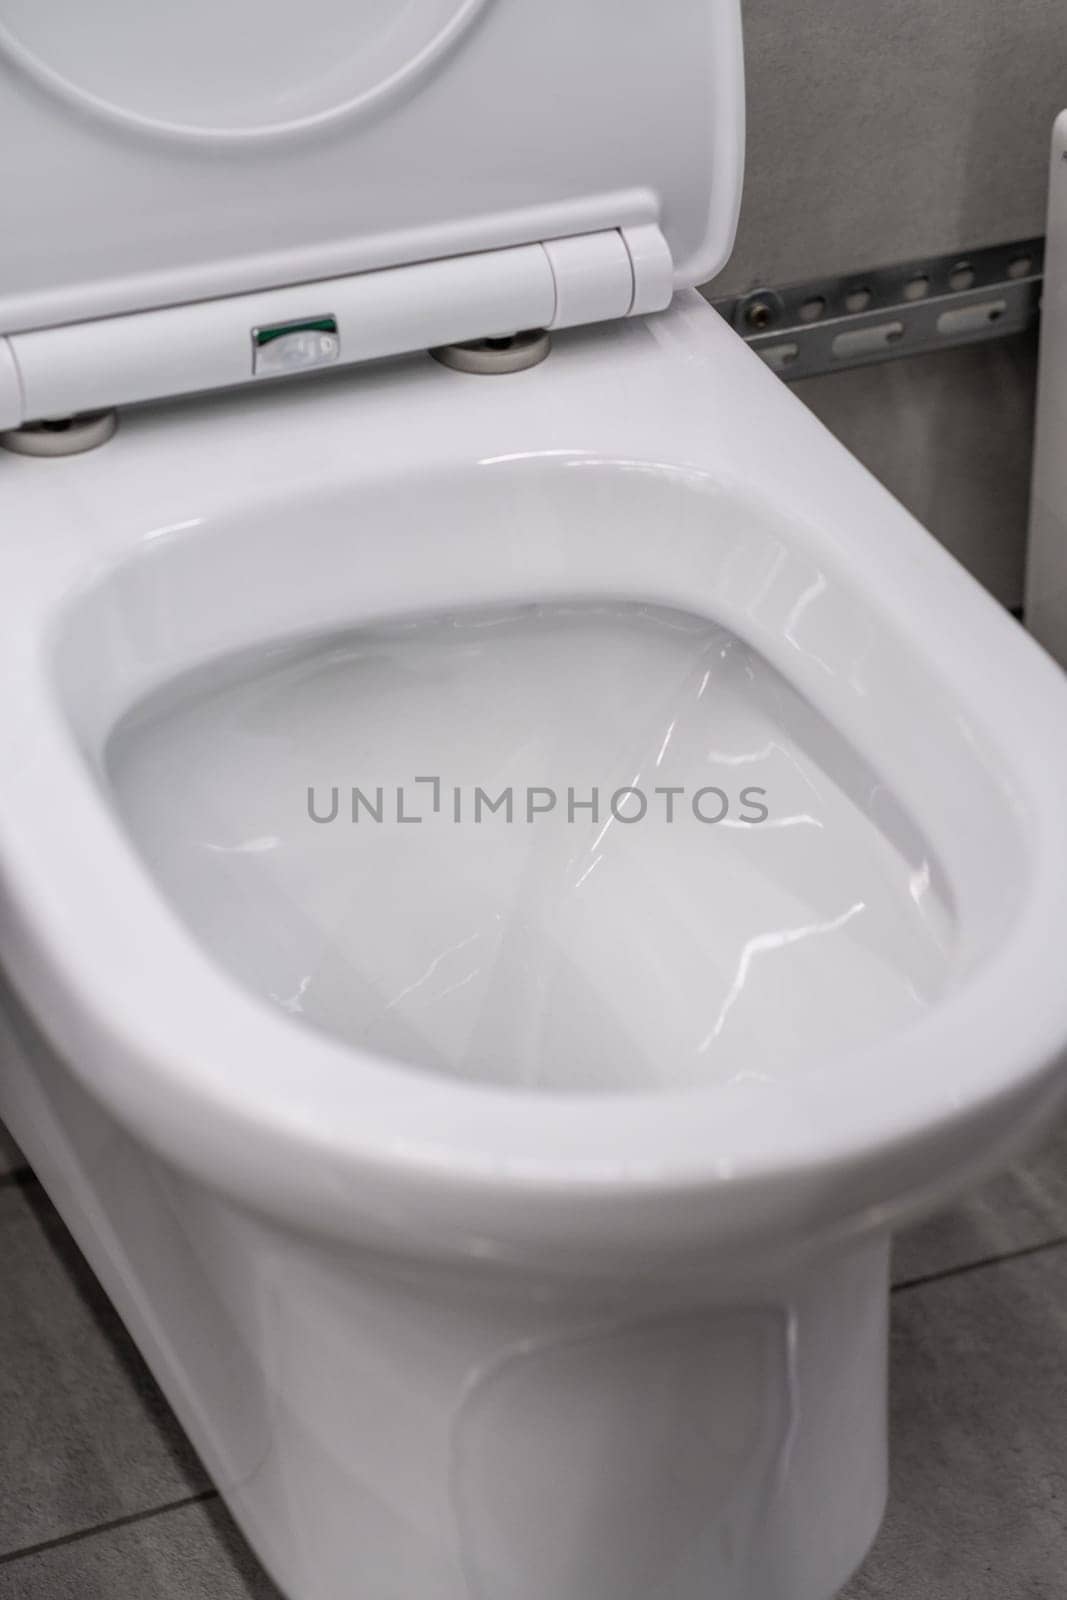 A white toilet, a bathroom fixture, sits on a tiled floor in a rectangleshaped bathroom. The toilet is made of composite material and is a necessary bathroom accessory